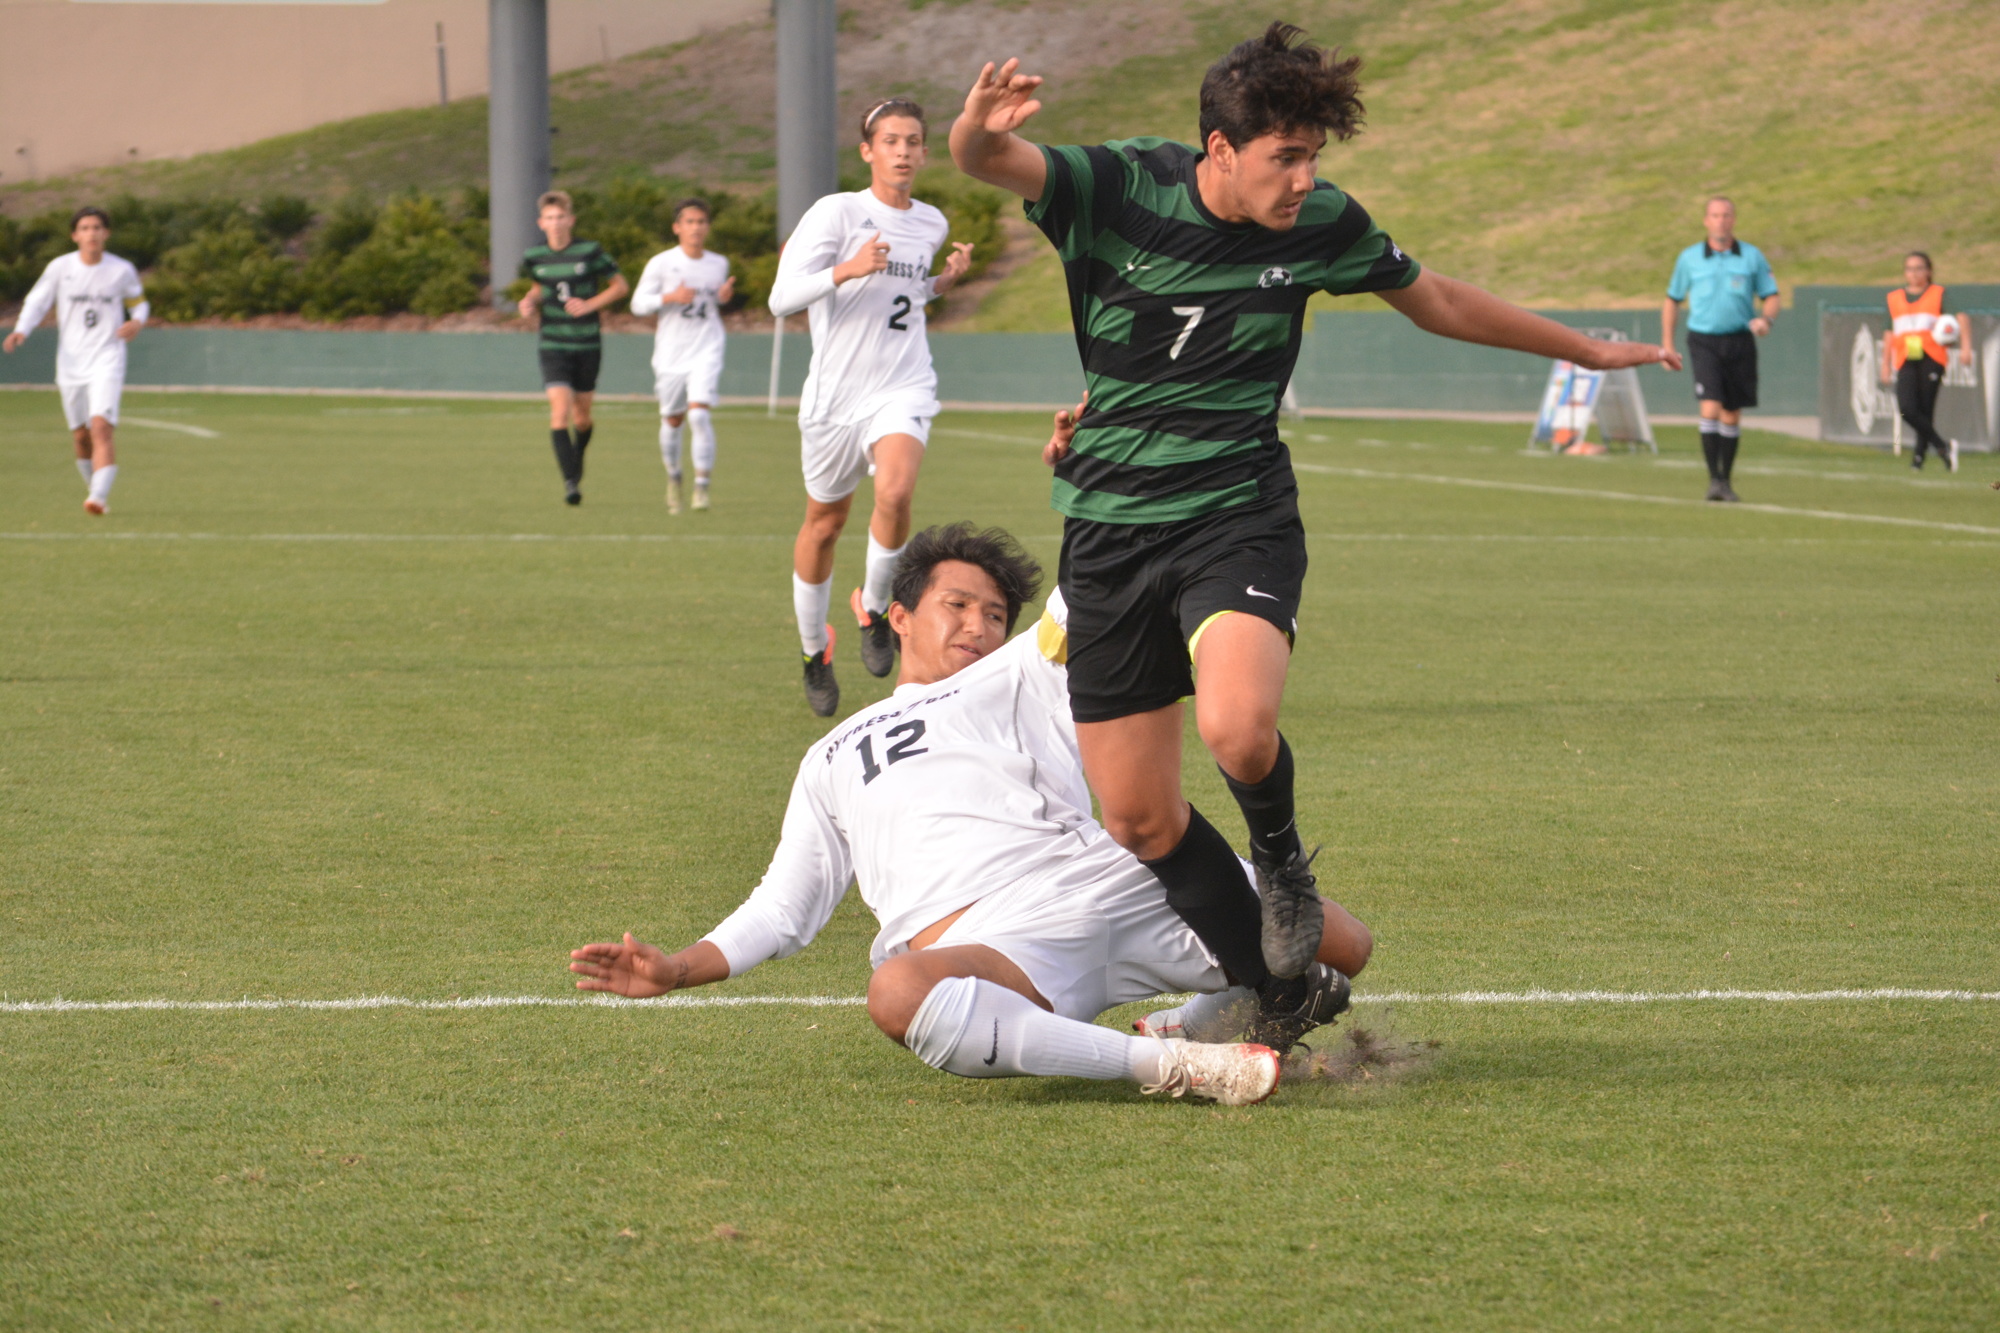 Ricky Yanez hops over a defender after an attempted tackle.